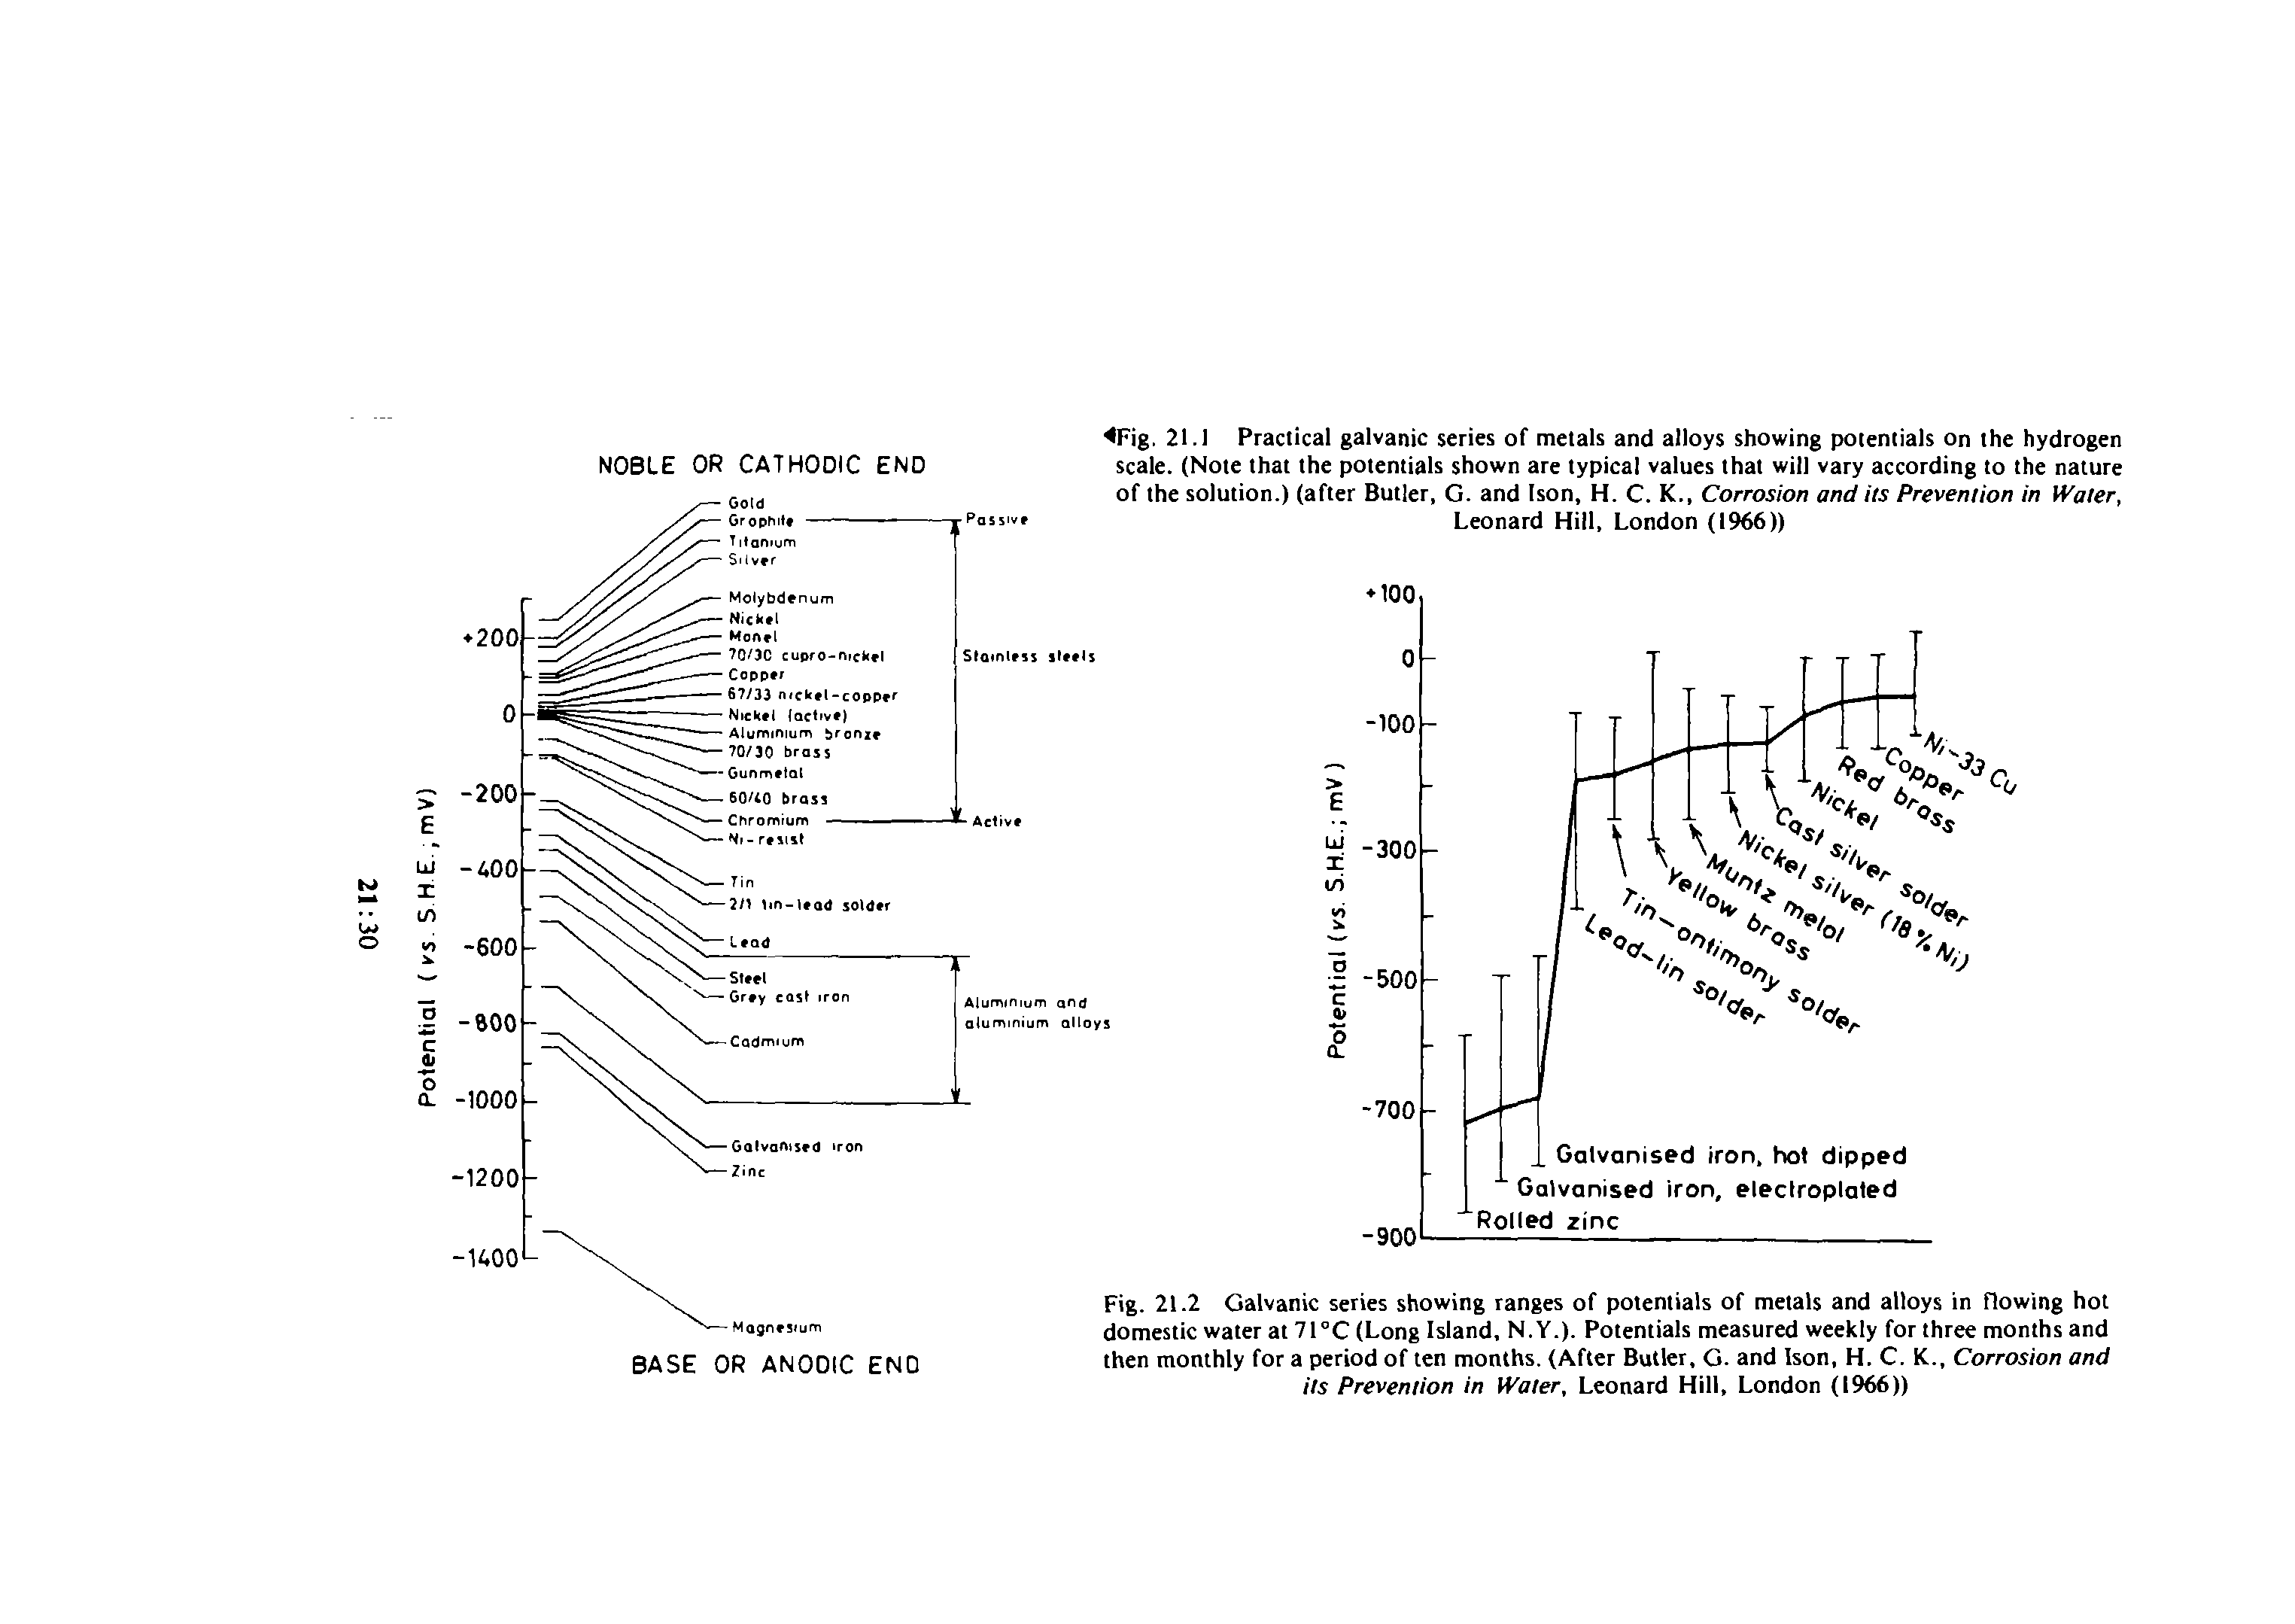 Fig. 21.2 Galvanic series showing ranges of potentials of metals and alloys in flowing hot domestic water at 71°C (Long Island, N.Y.). Potentials measured weekly for three months and then monthly for a period of ten months. (After Butler, G. and Ison, H. C. K., Corrosion and its Prevention in Water, Leonard Hill, London (1966))...